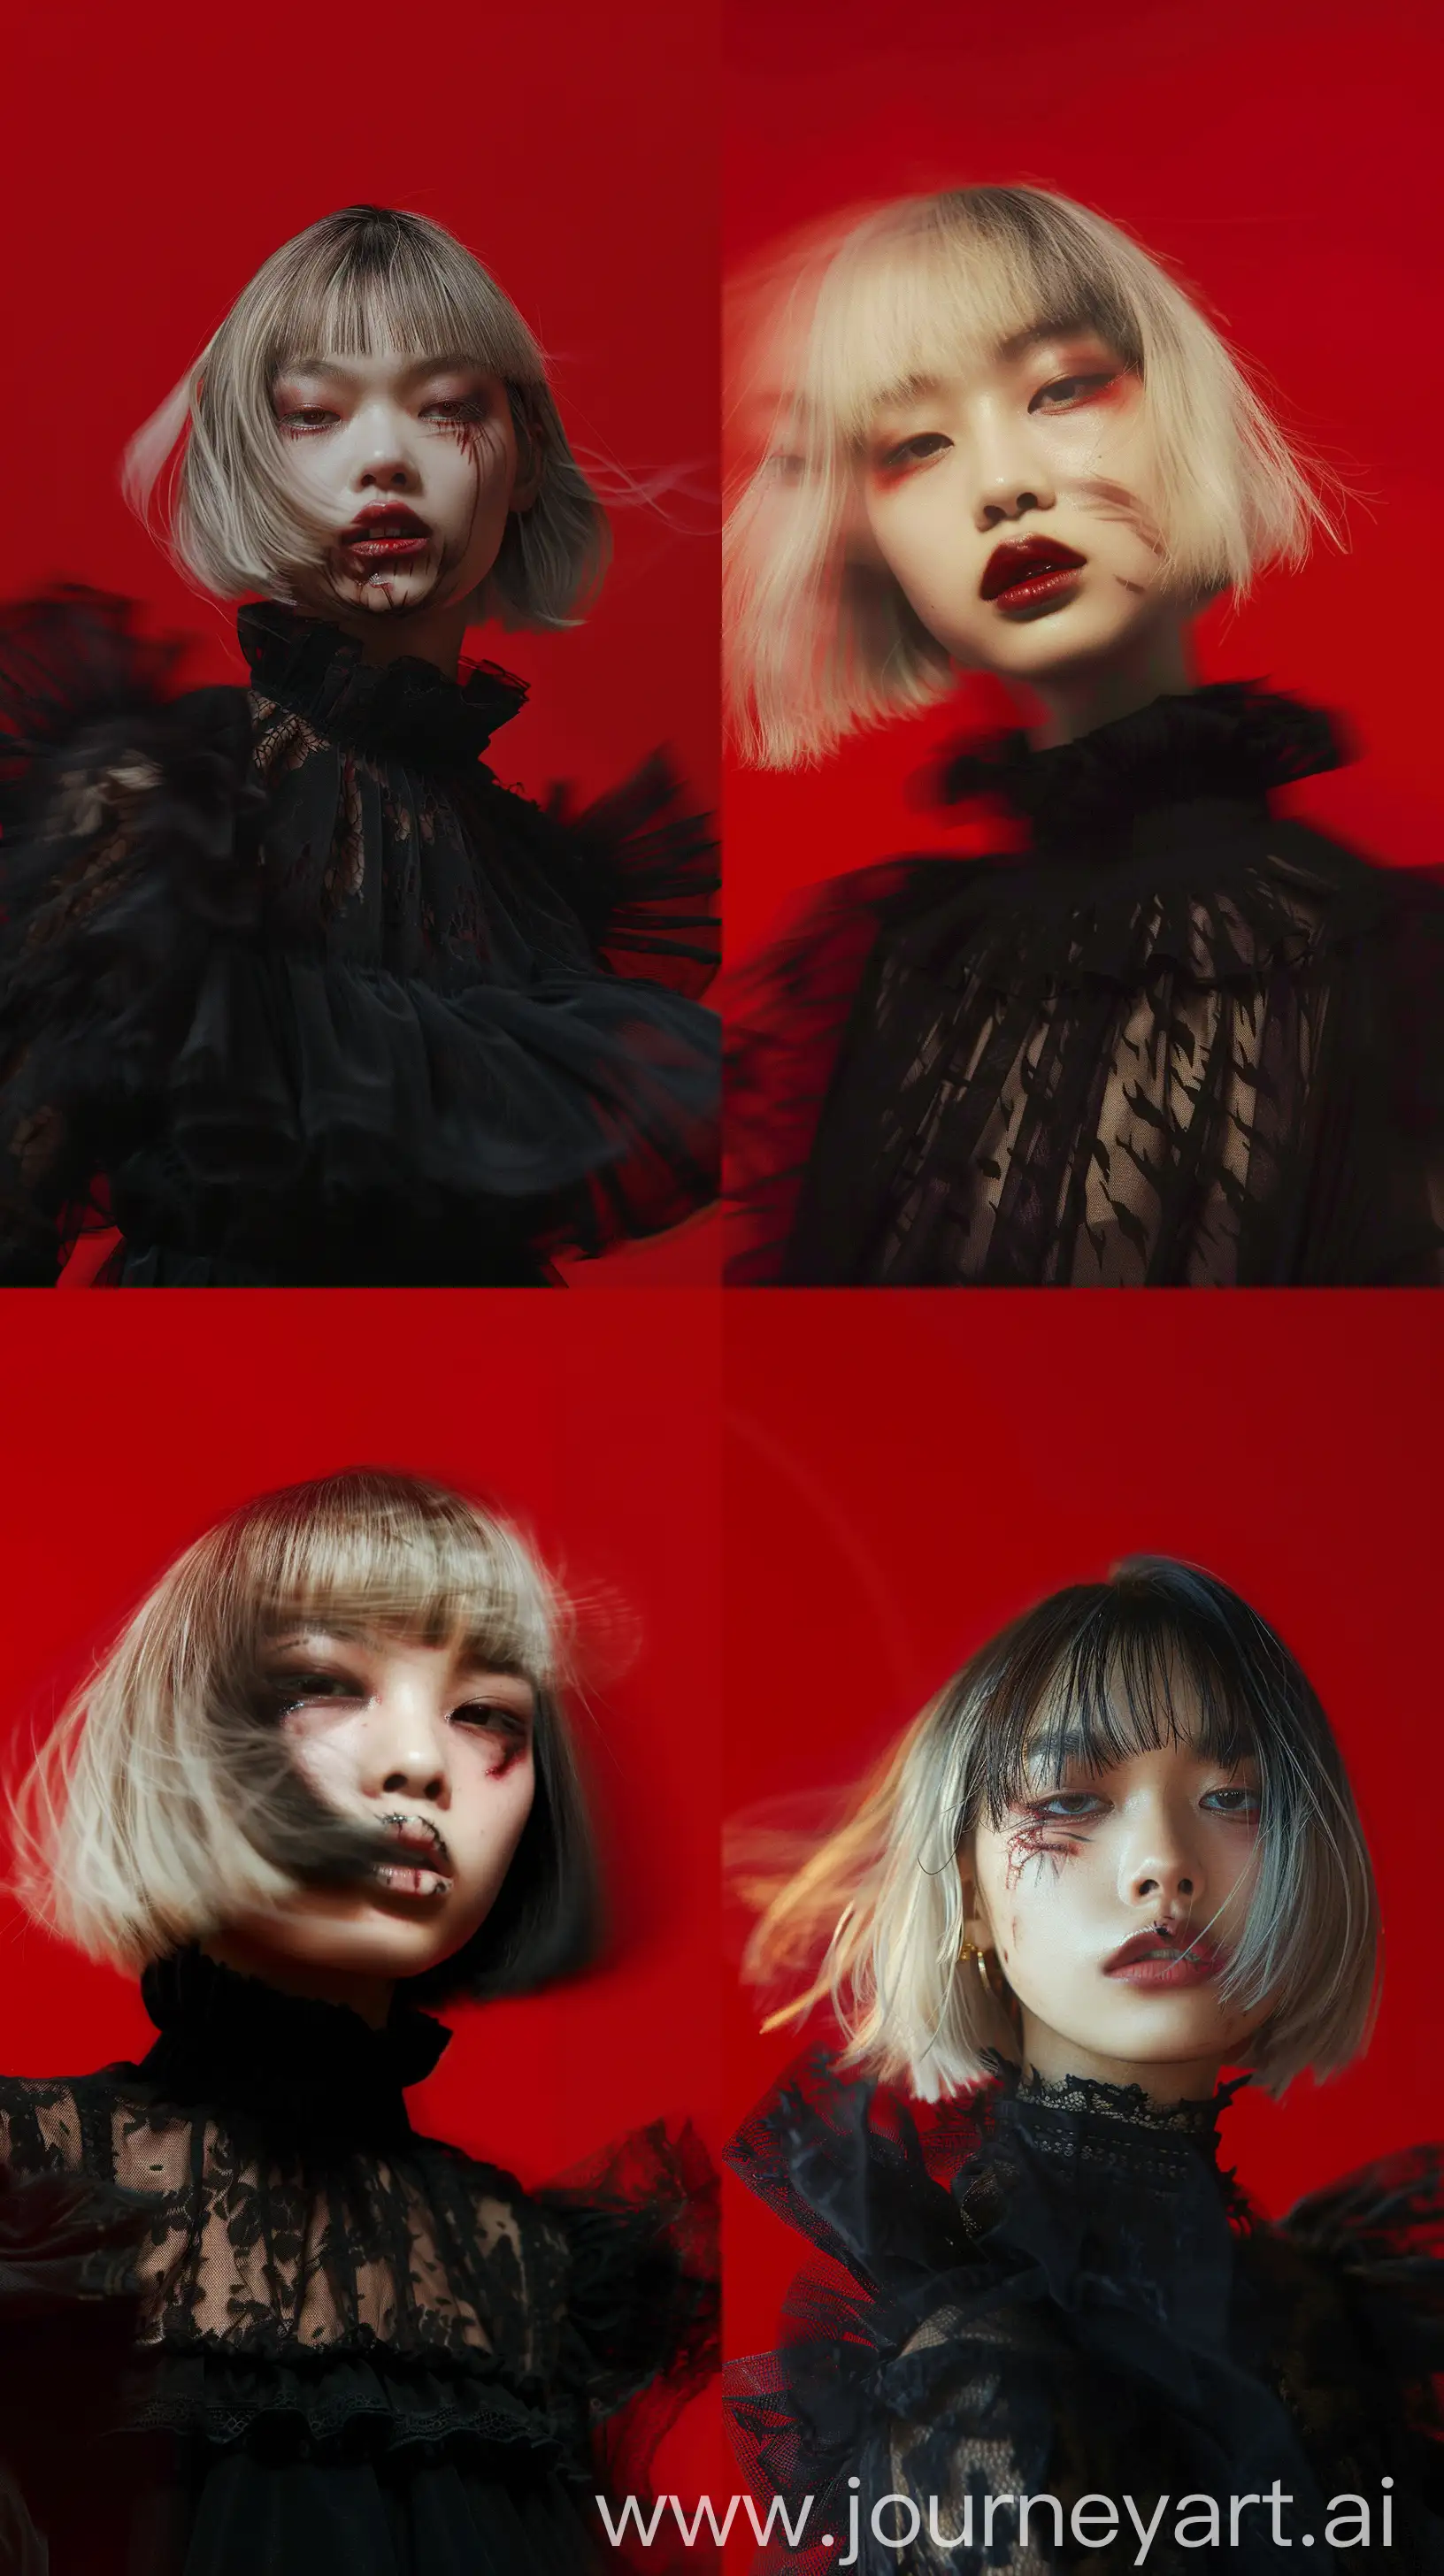 Edgy-Asian-Teen-Model-with-Bleached-Bob-Hair-in-Gothic-High-Fashion-Against-Red-Background